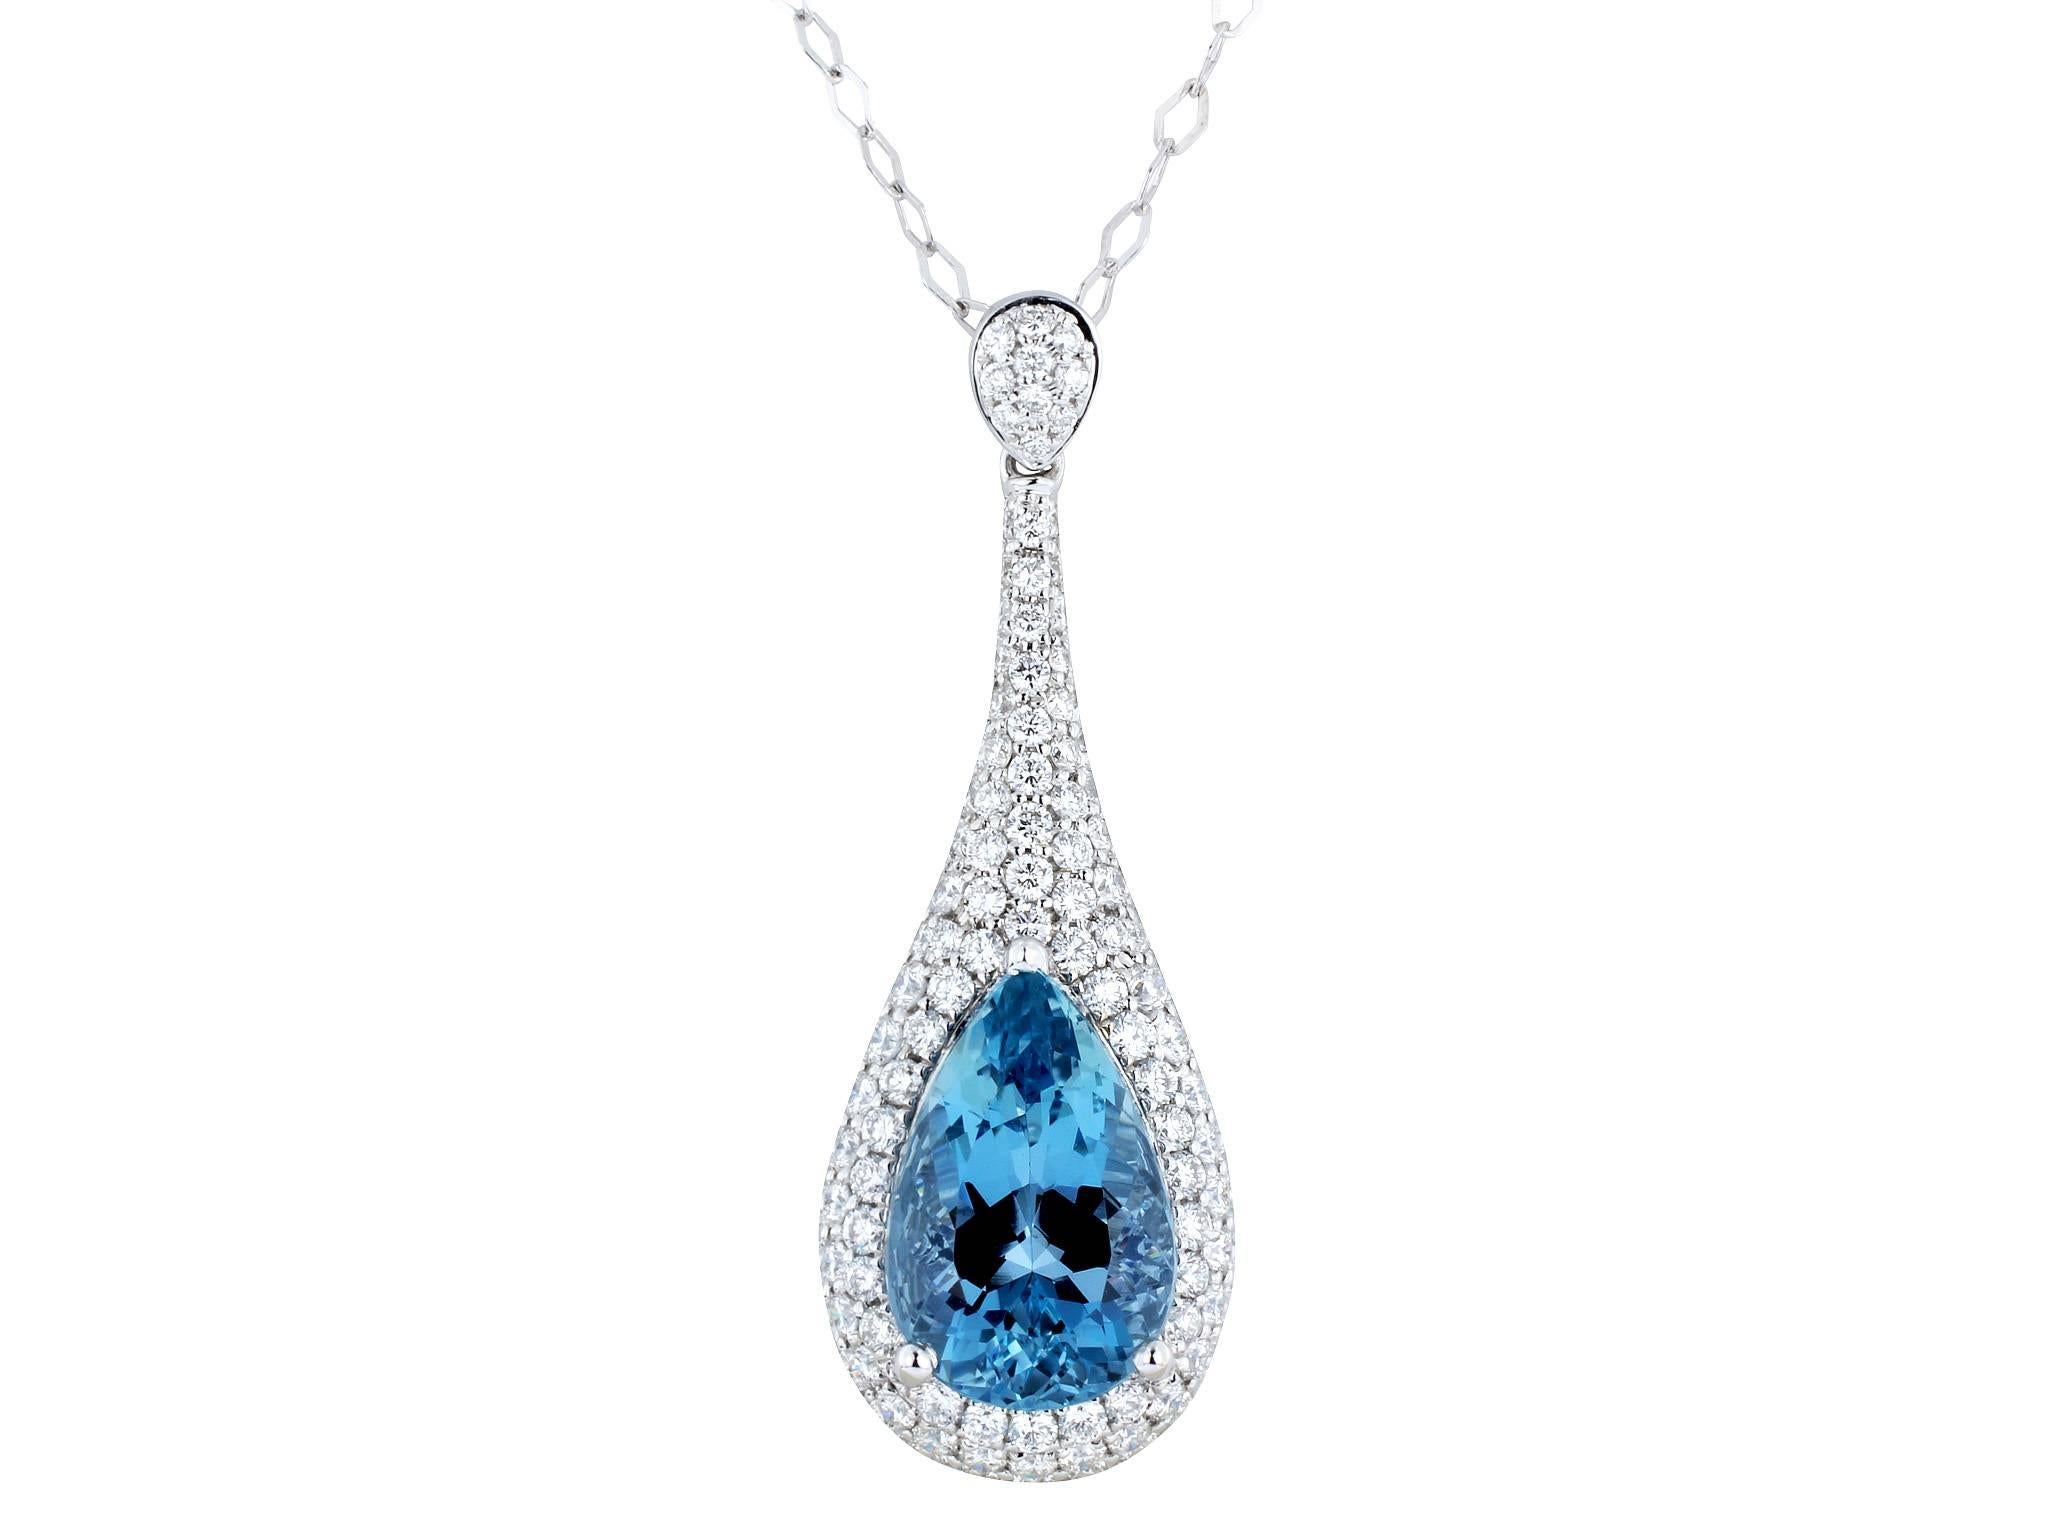 18 karat white gold drop pendant consisting of 1 pear shape aquamarine weighing 3.26 carats set with 1.20 carats total weight of round brilliant cut diamond accents.